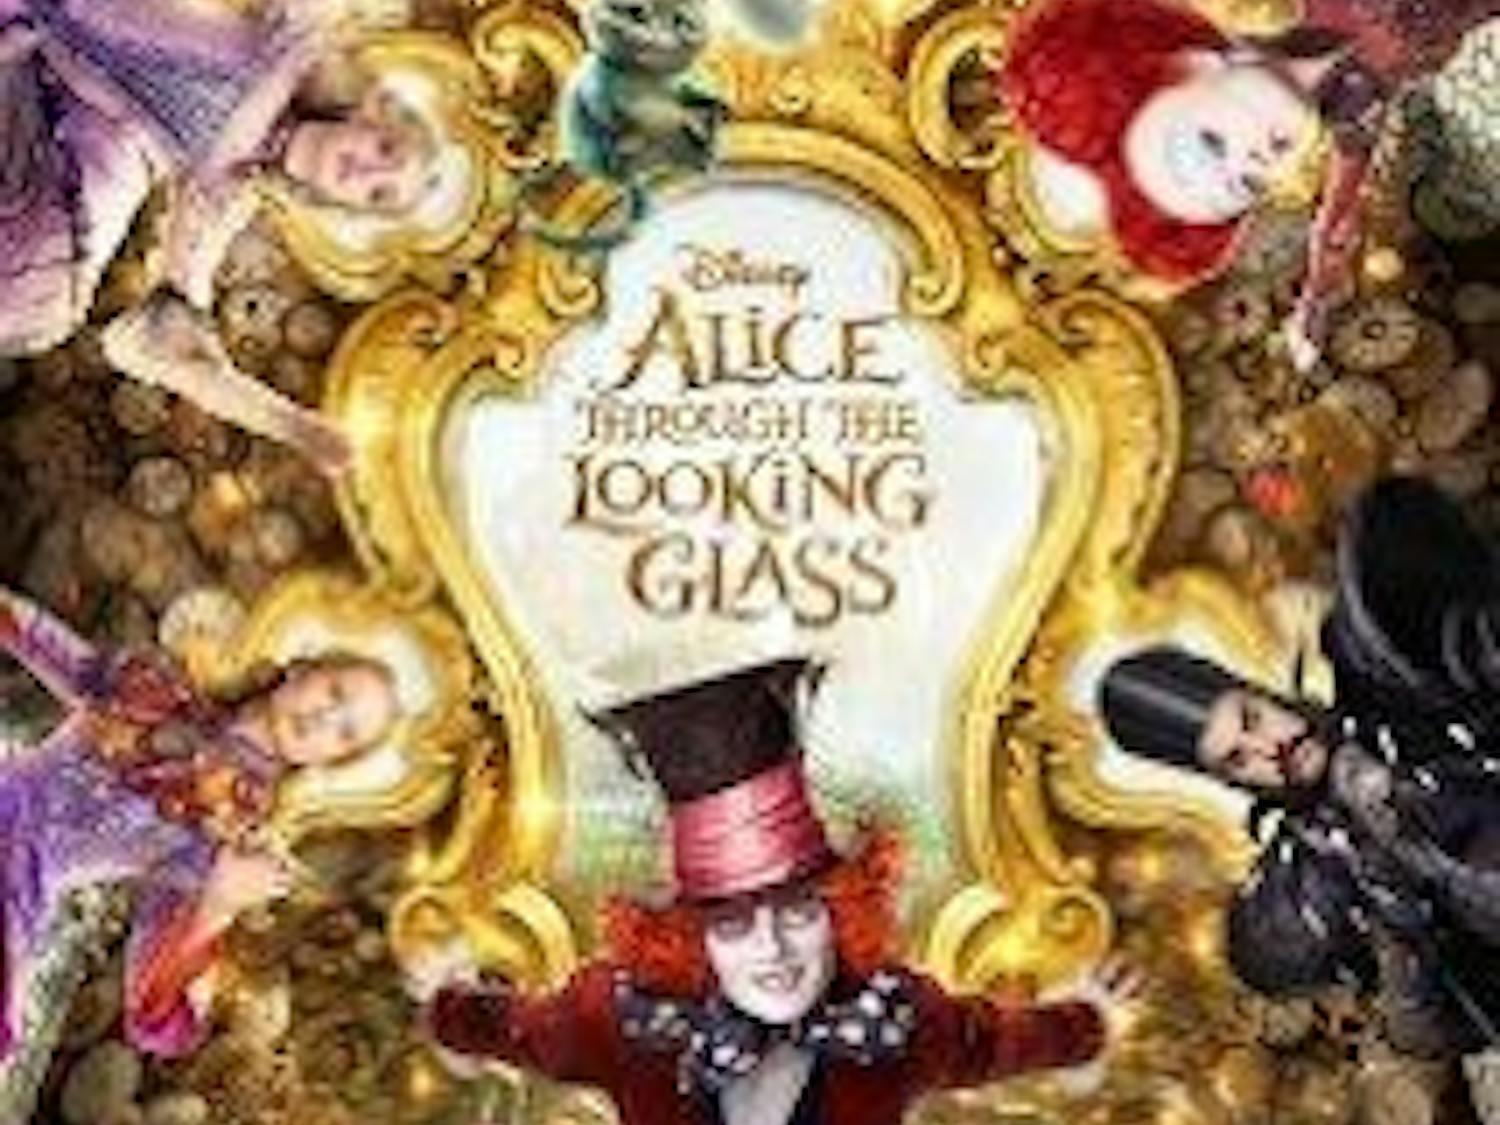 Alice Through the Looking Glass  